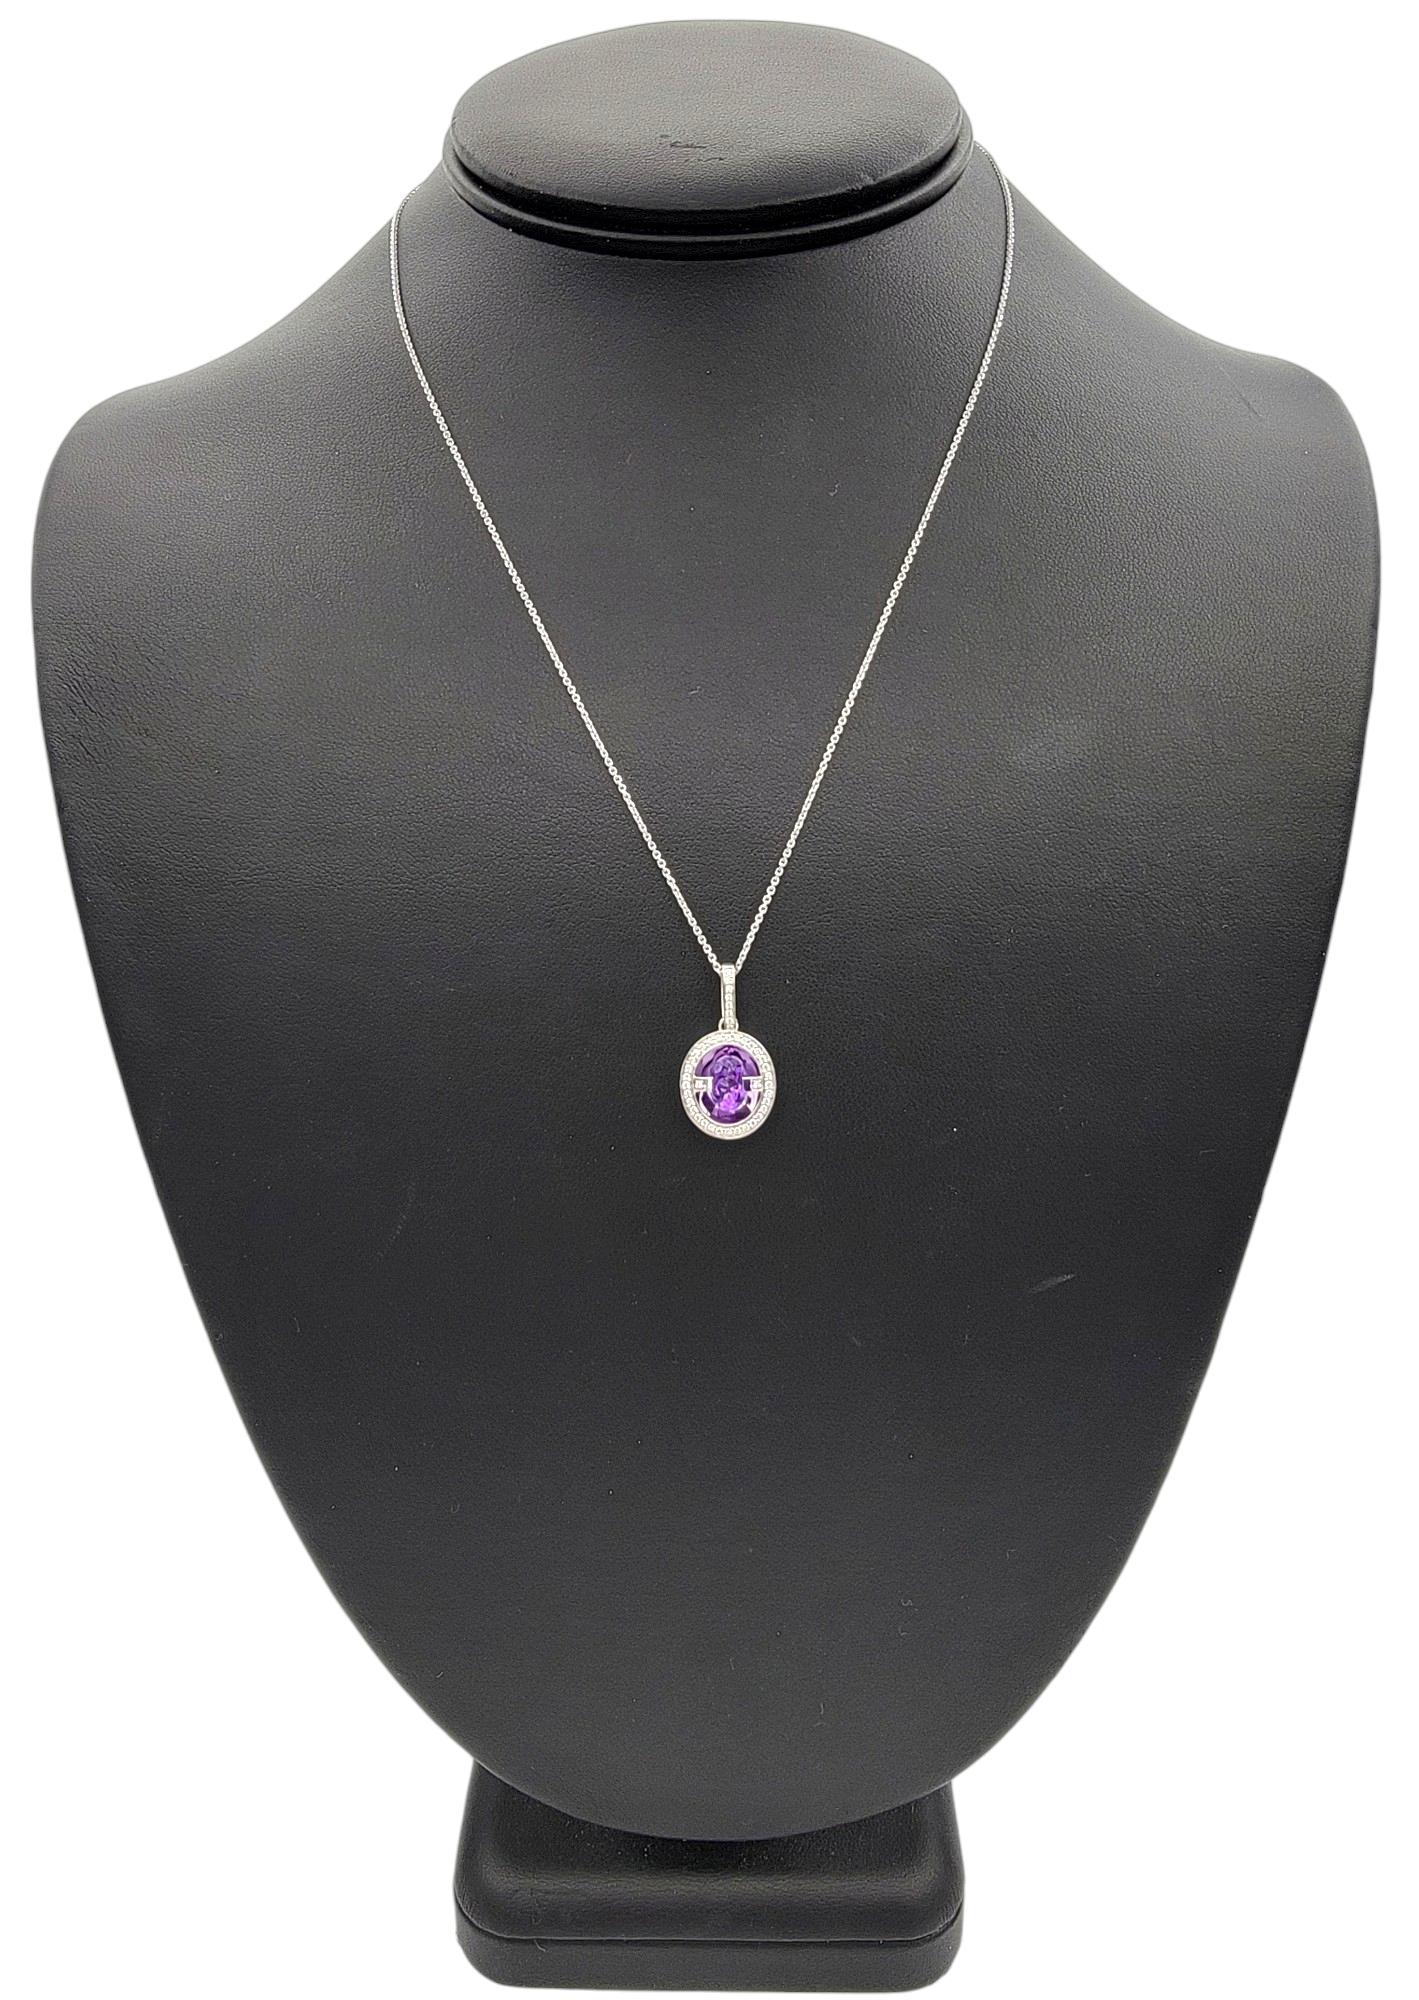 Floating Oval Amethyst and Diamond Pendant Necklace Set in 14 Karat White Gold For Sale 4